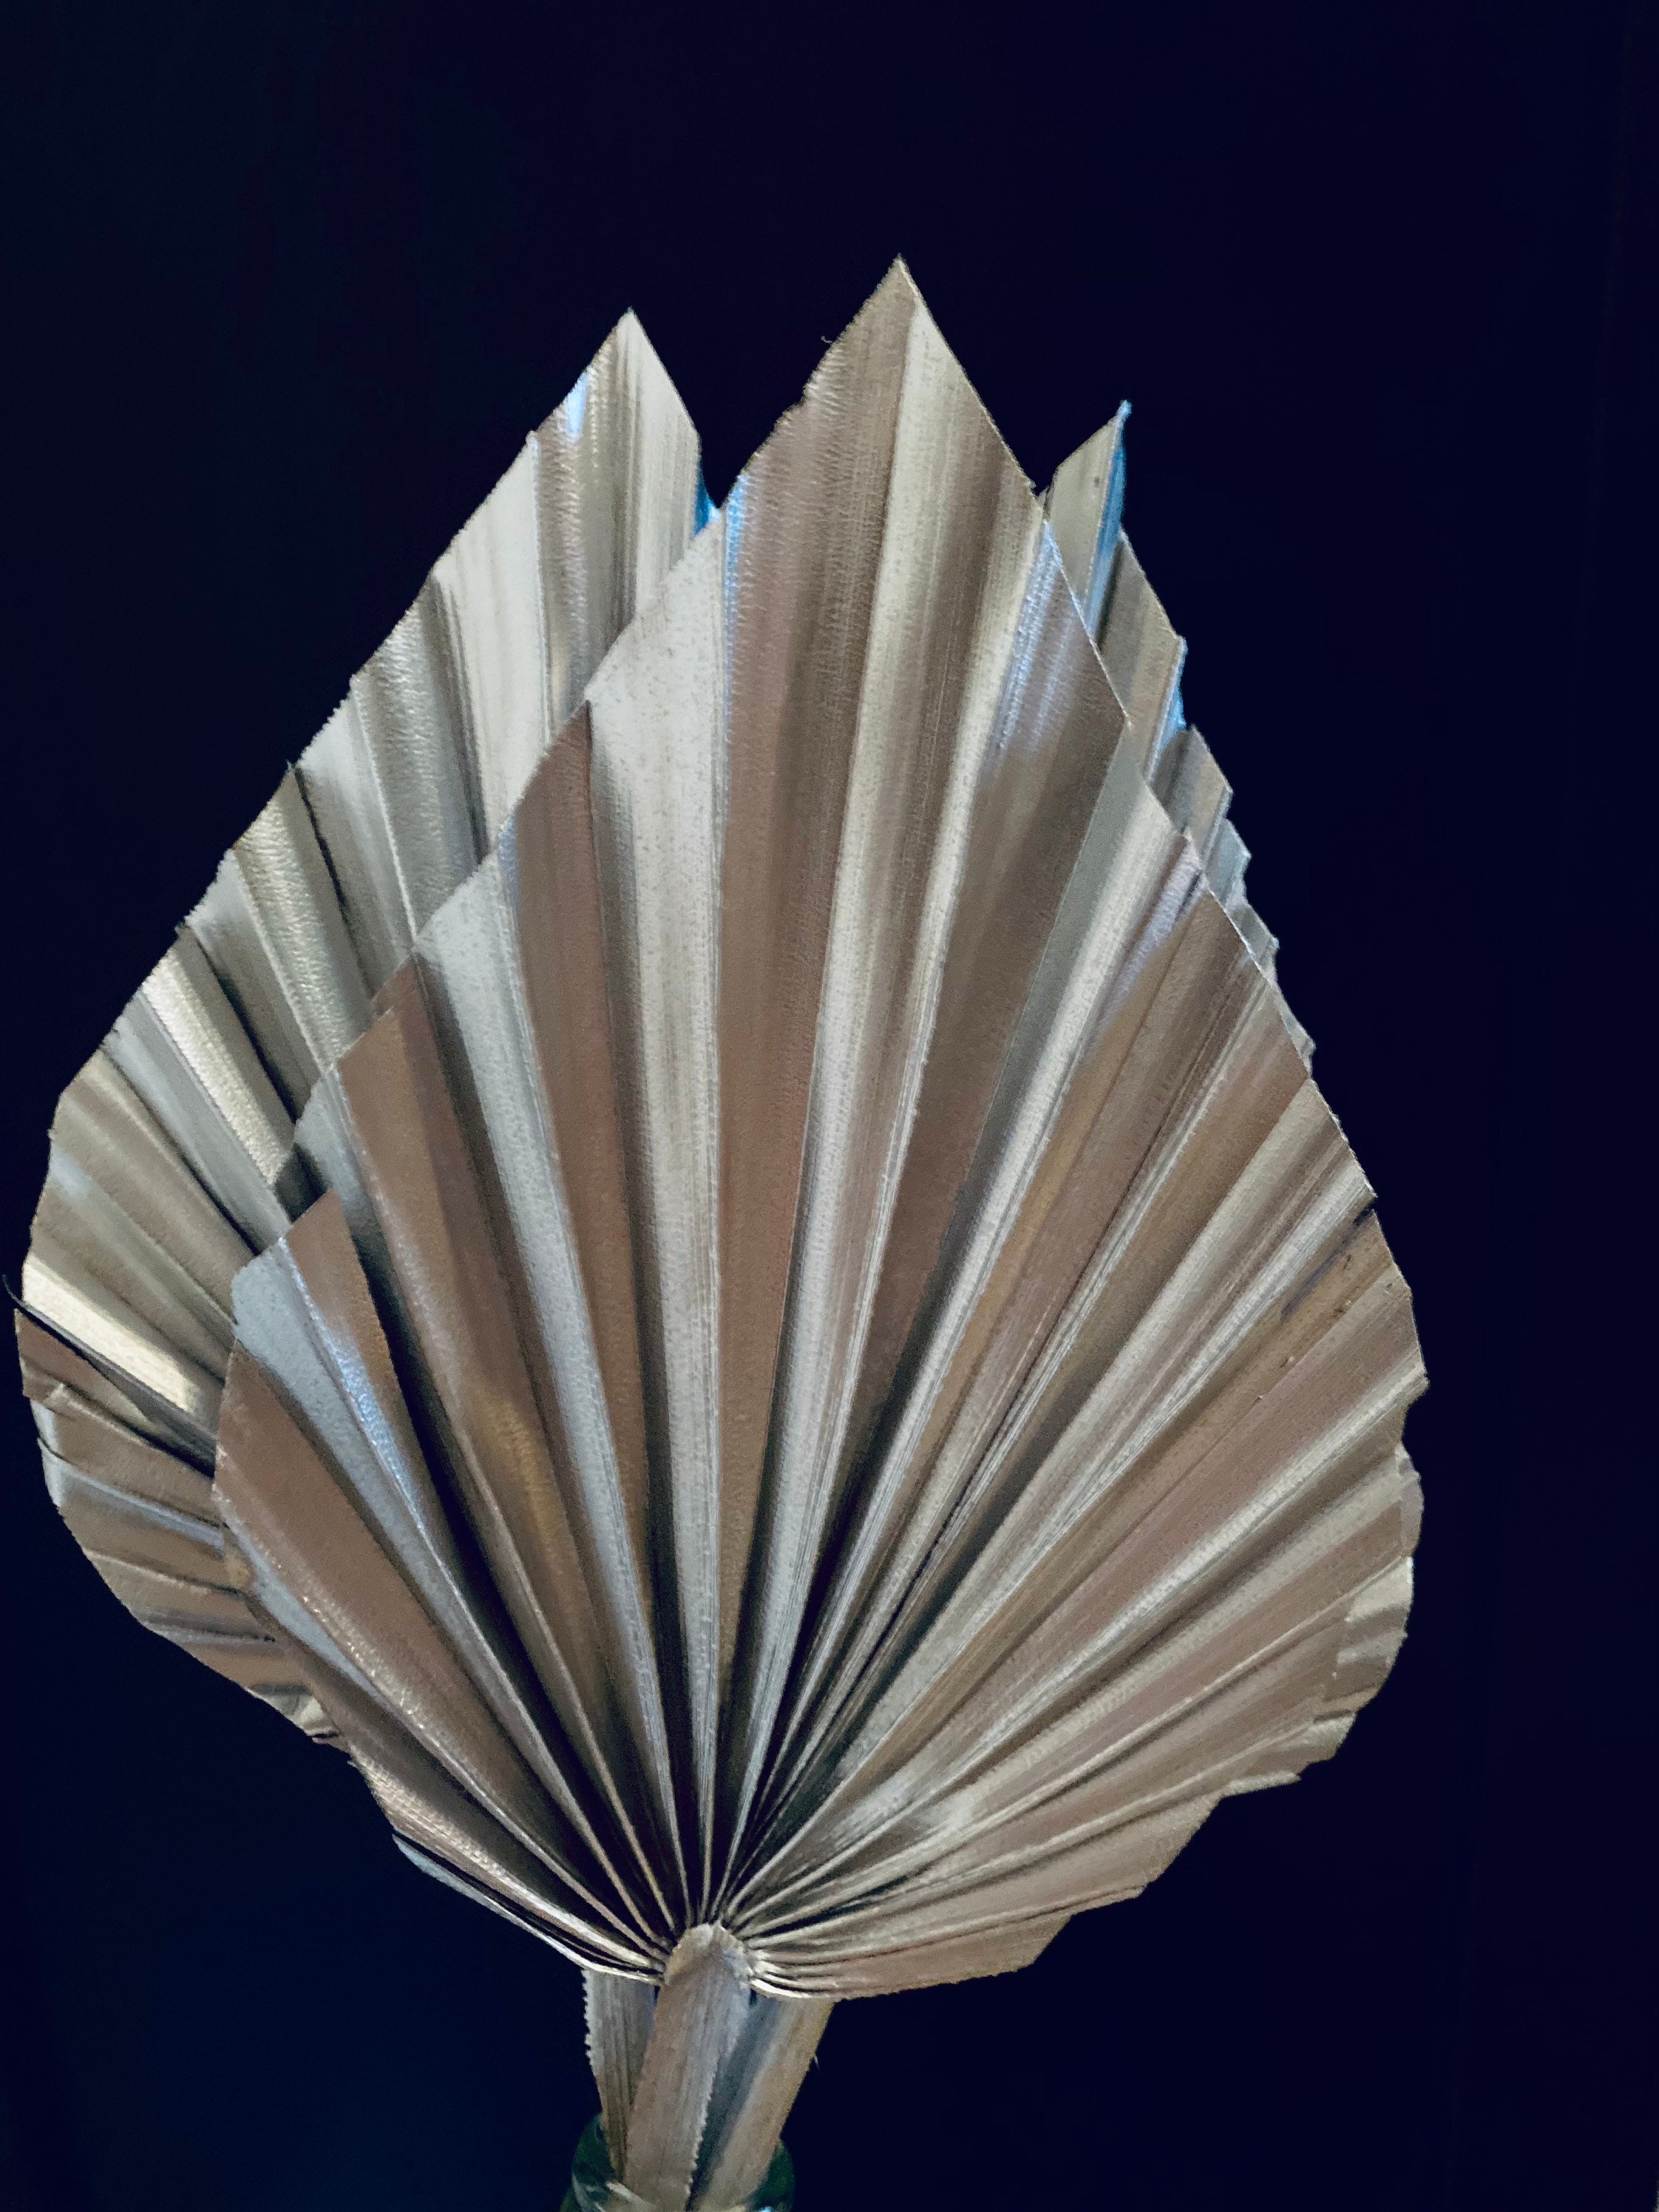 Edible Silver Leaf 24K Pure Silver Foil Large Square Sheets 8 by 8 Cm E174  Approved Silver Leaves 